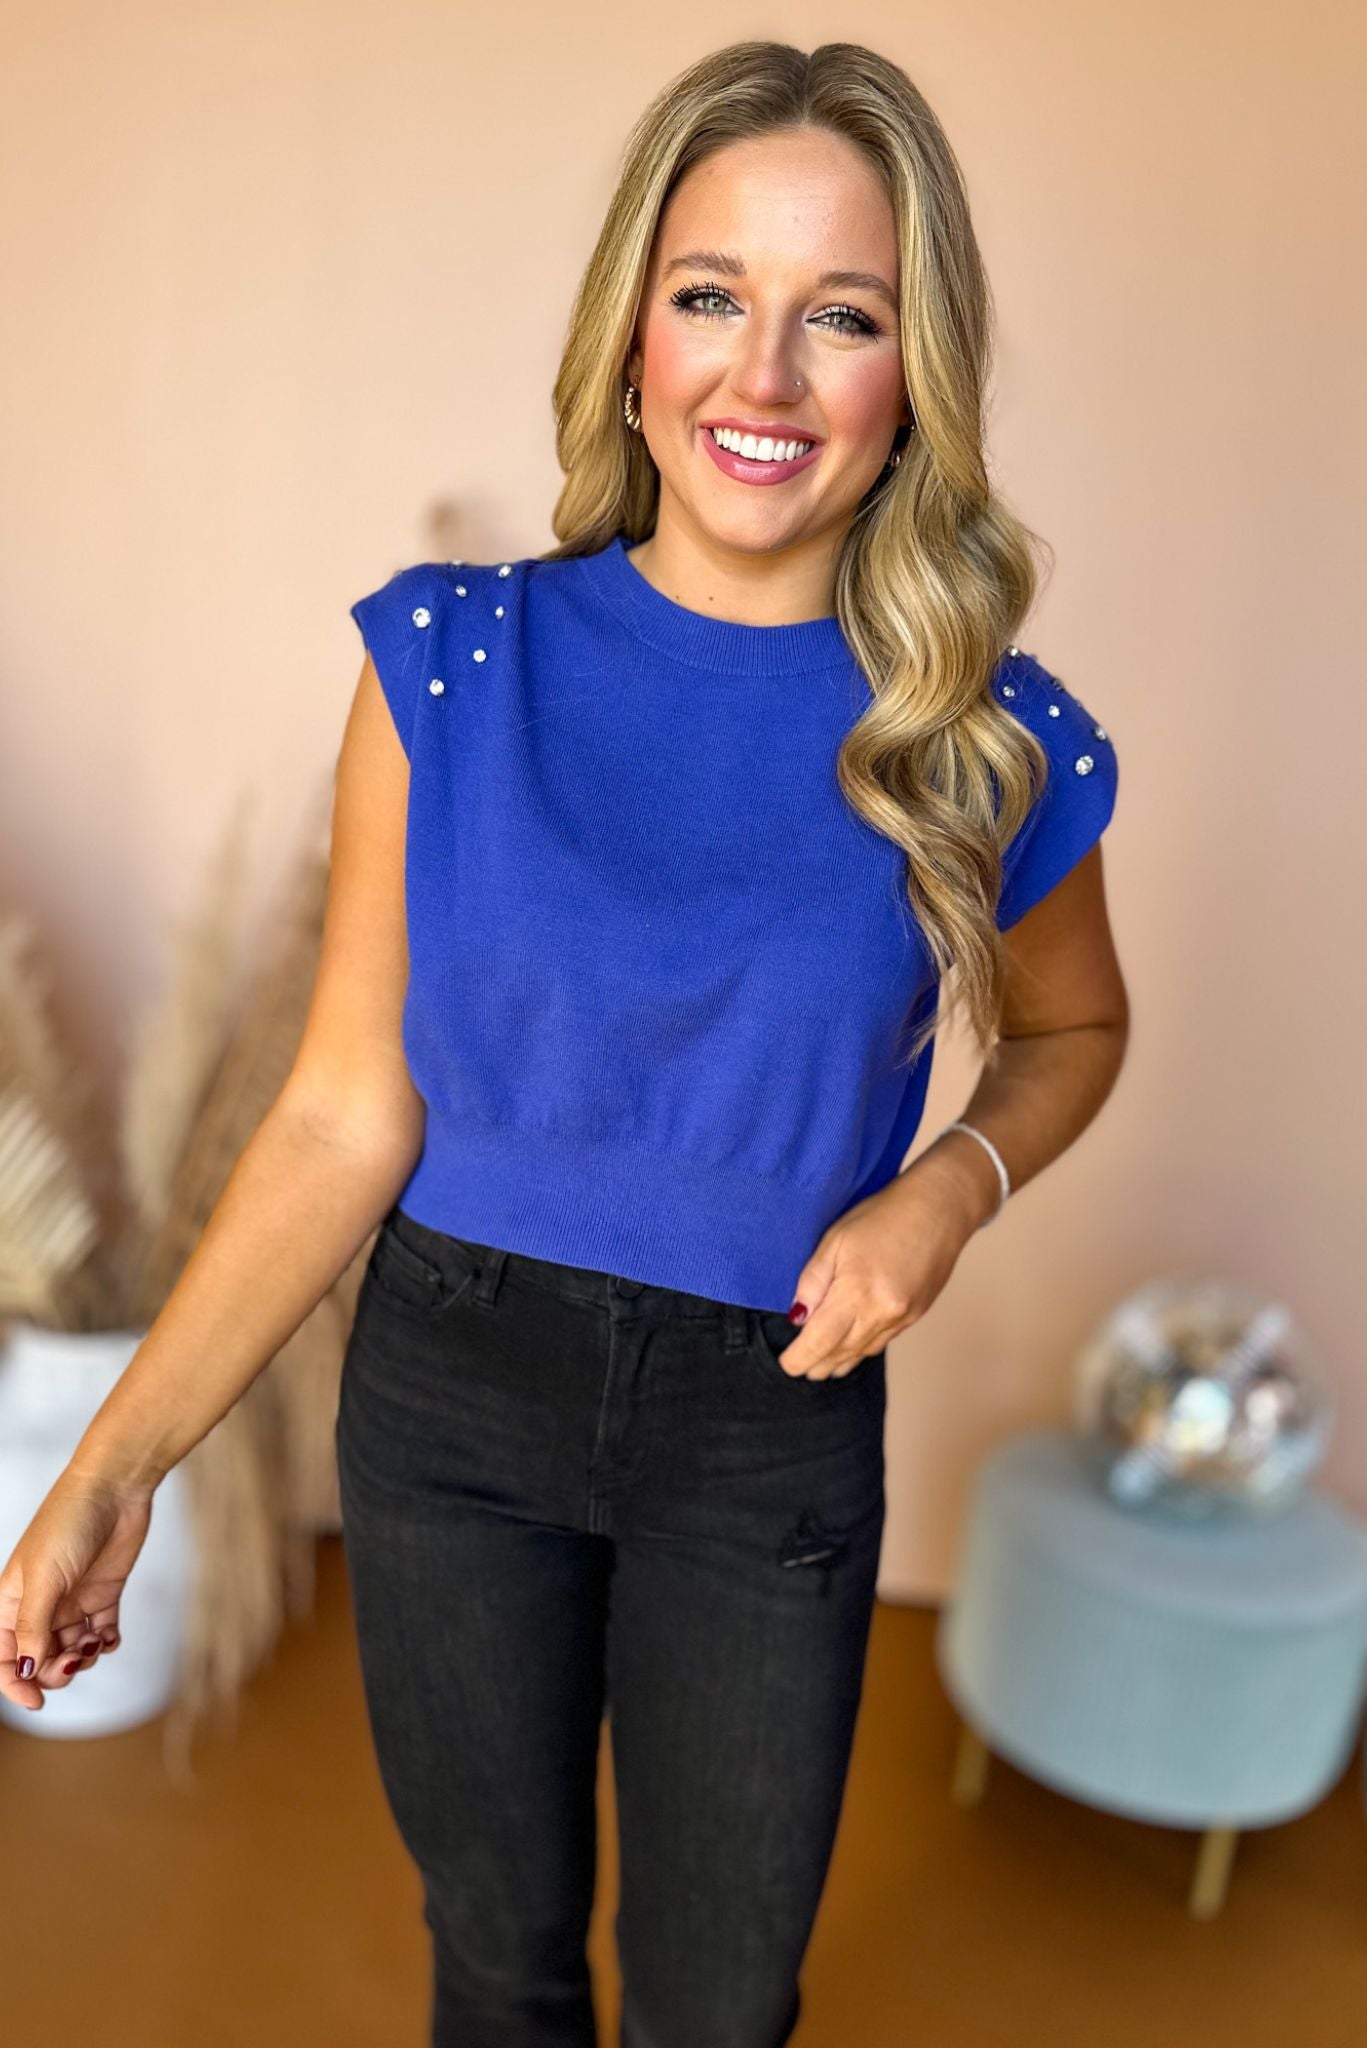 Cobalt Blue Embellished Shoulder Sleeveless Top, must have top, must have style, must have fall, fall collection, fall fashion, elevated style, elevated top, mom style, fall style, shop style your senses by mallory fitzsimmons